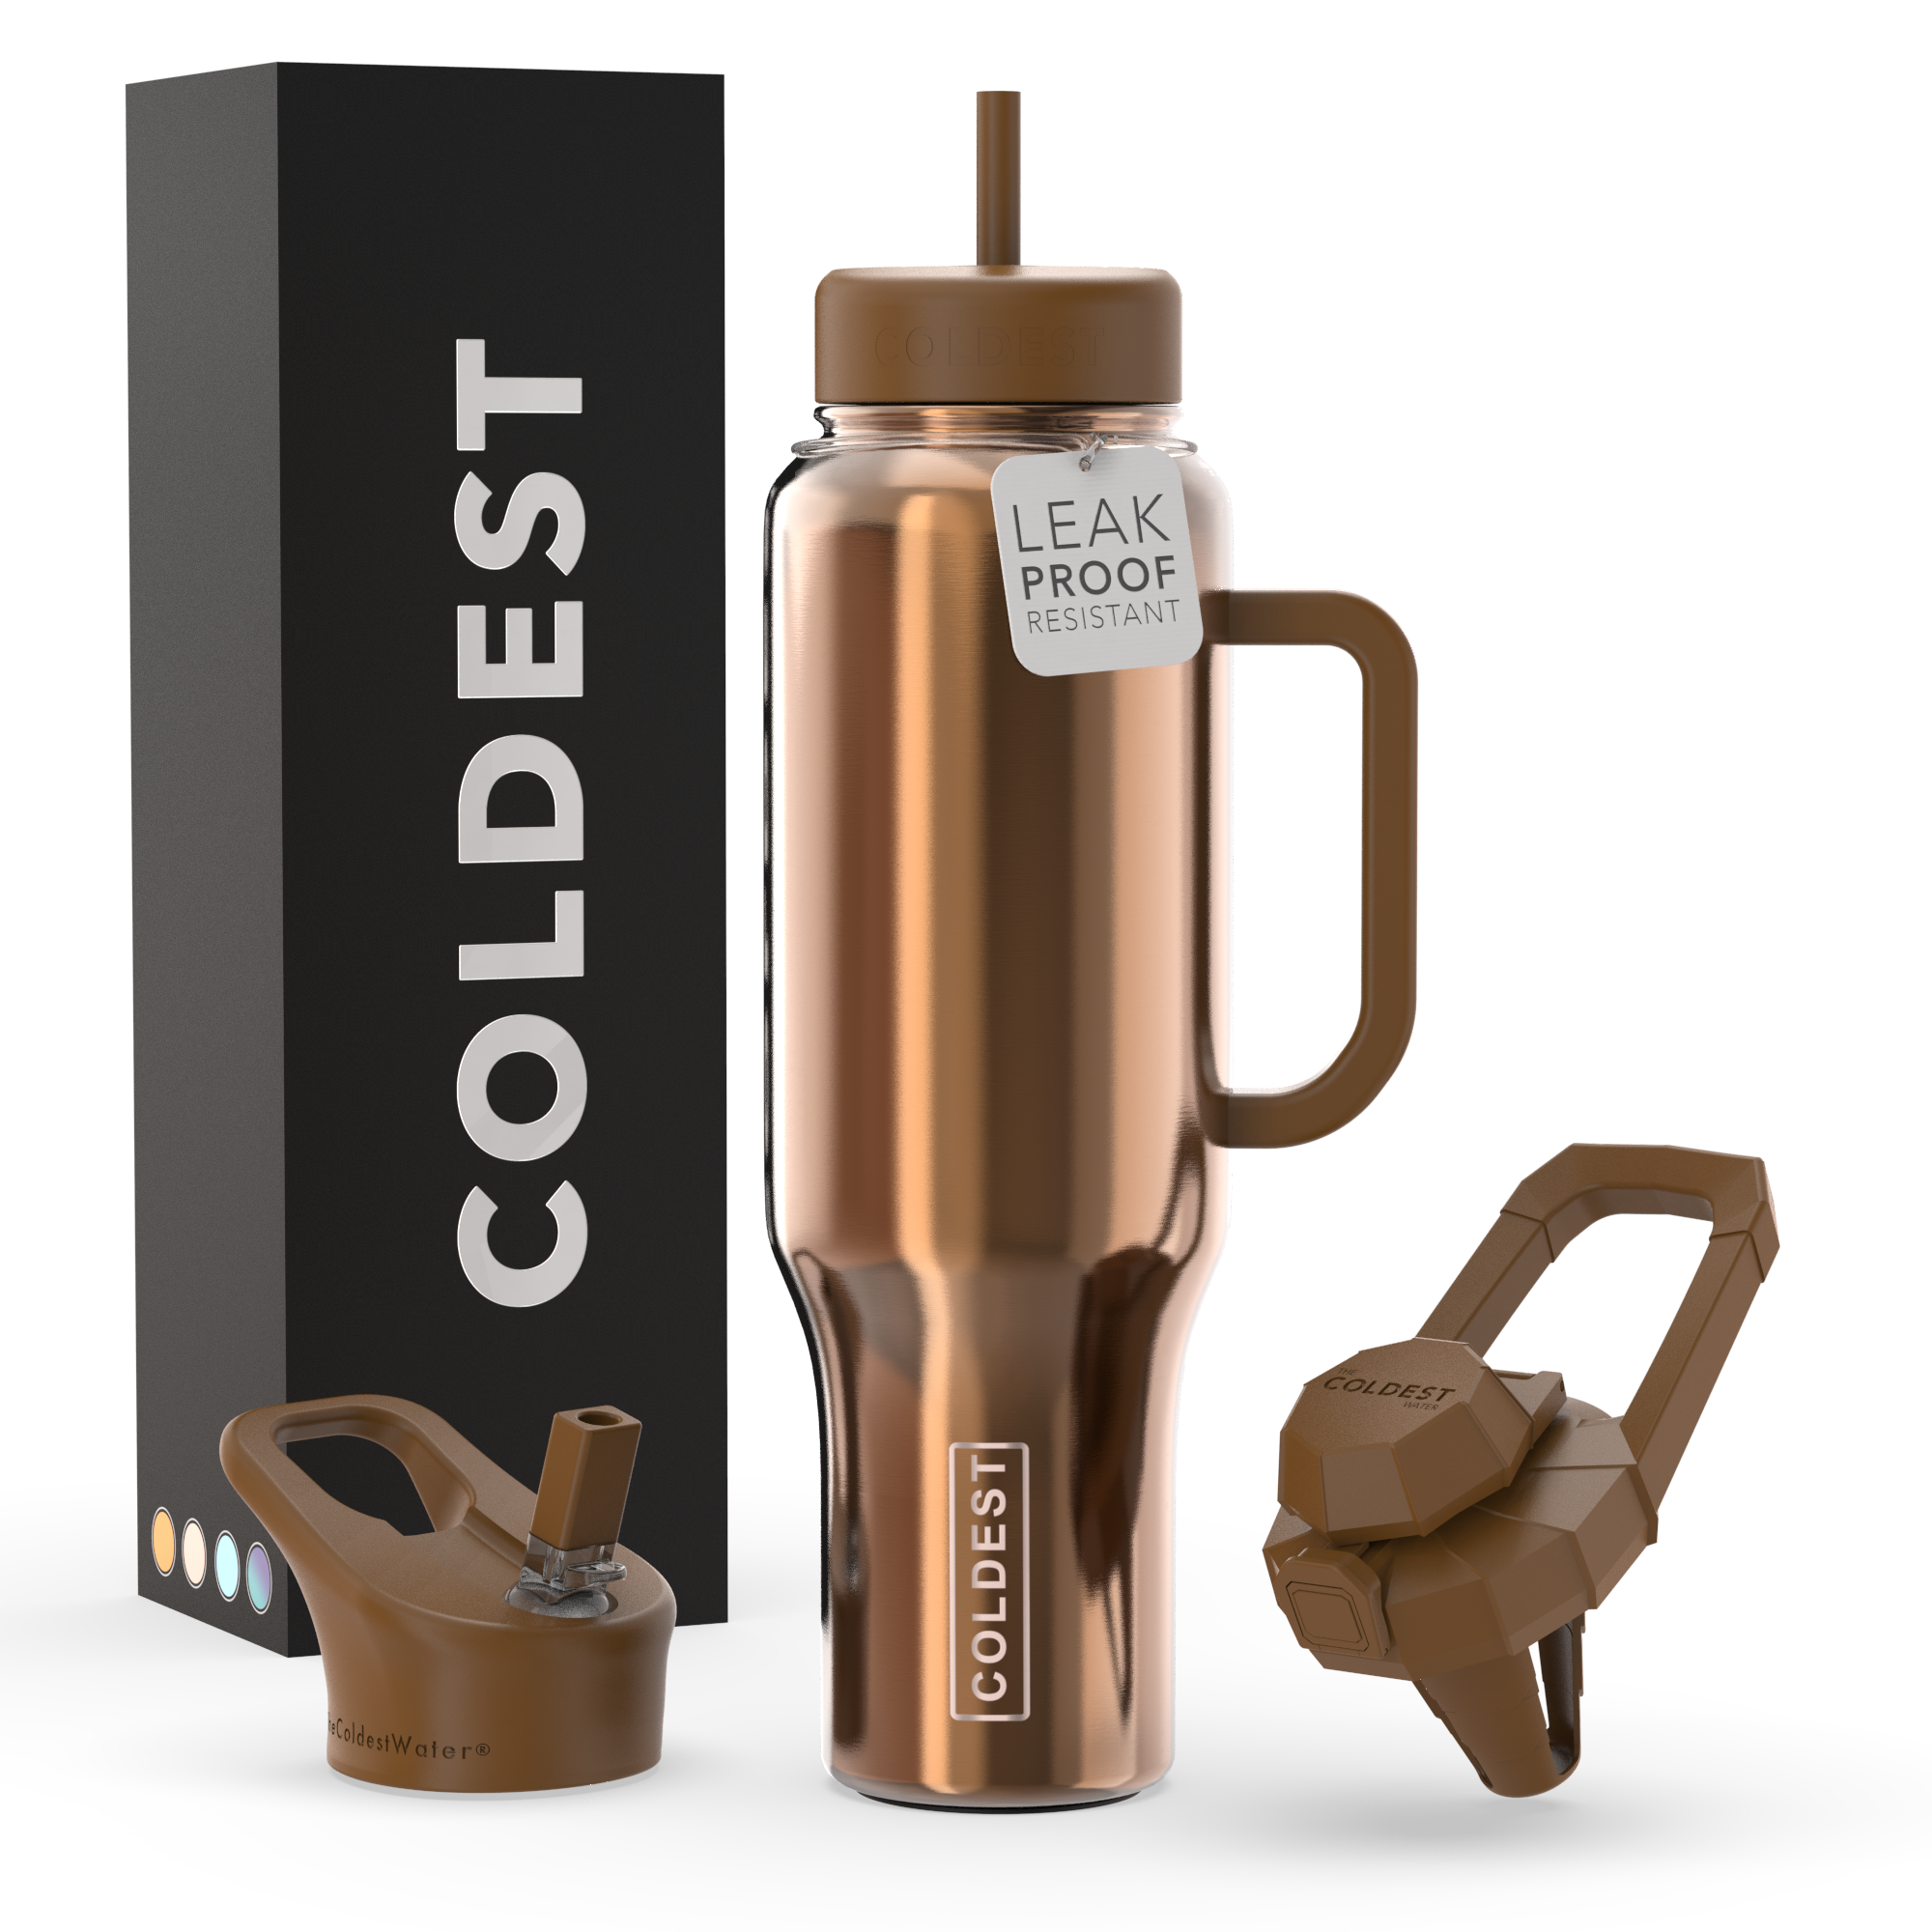 Buy the newest Limited Edition: Ocean 22oz. Stainless Steel Bottle & Lid  Cirkul at Fantastic Prices